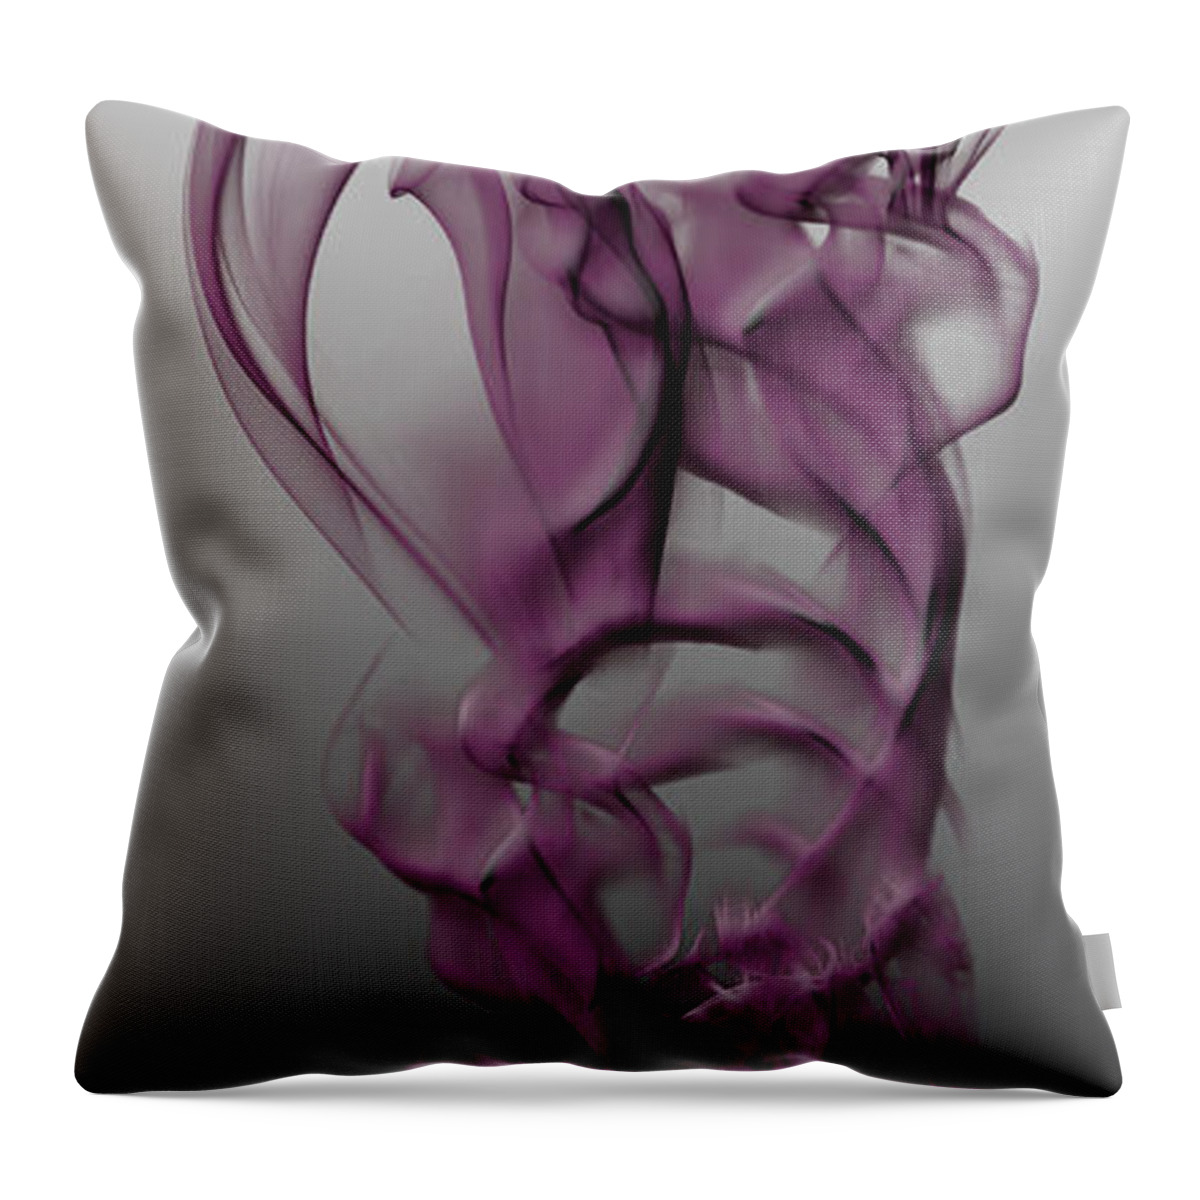 Clay Throw Pillow featuring the digital art Skeletal Flow by Clayton Bruster